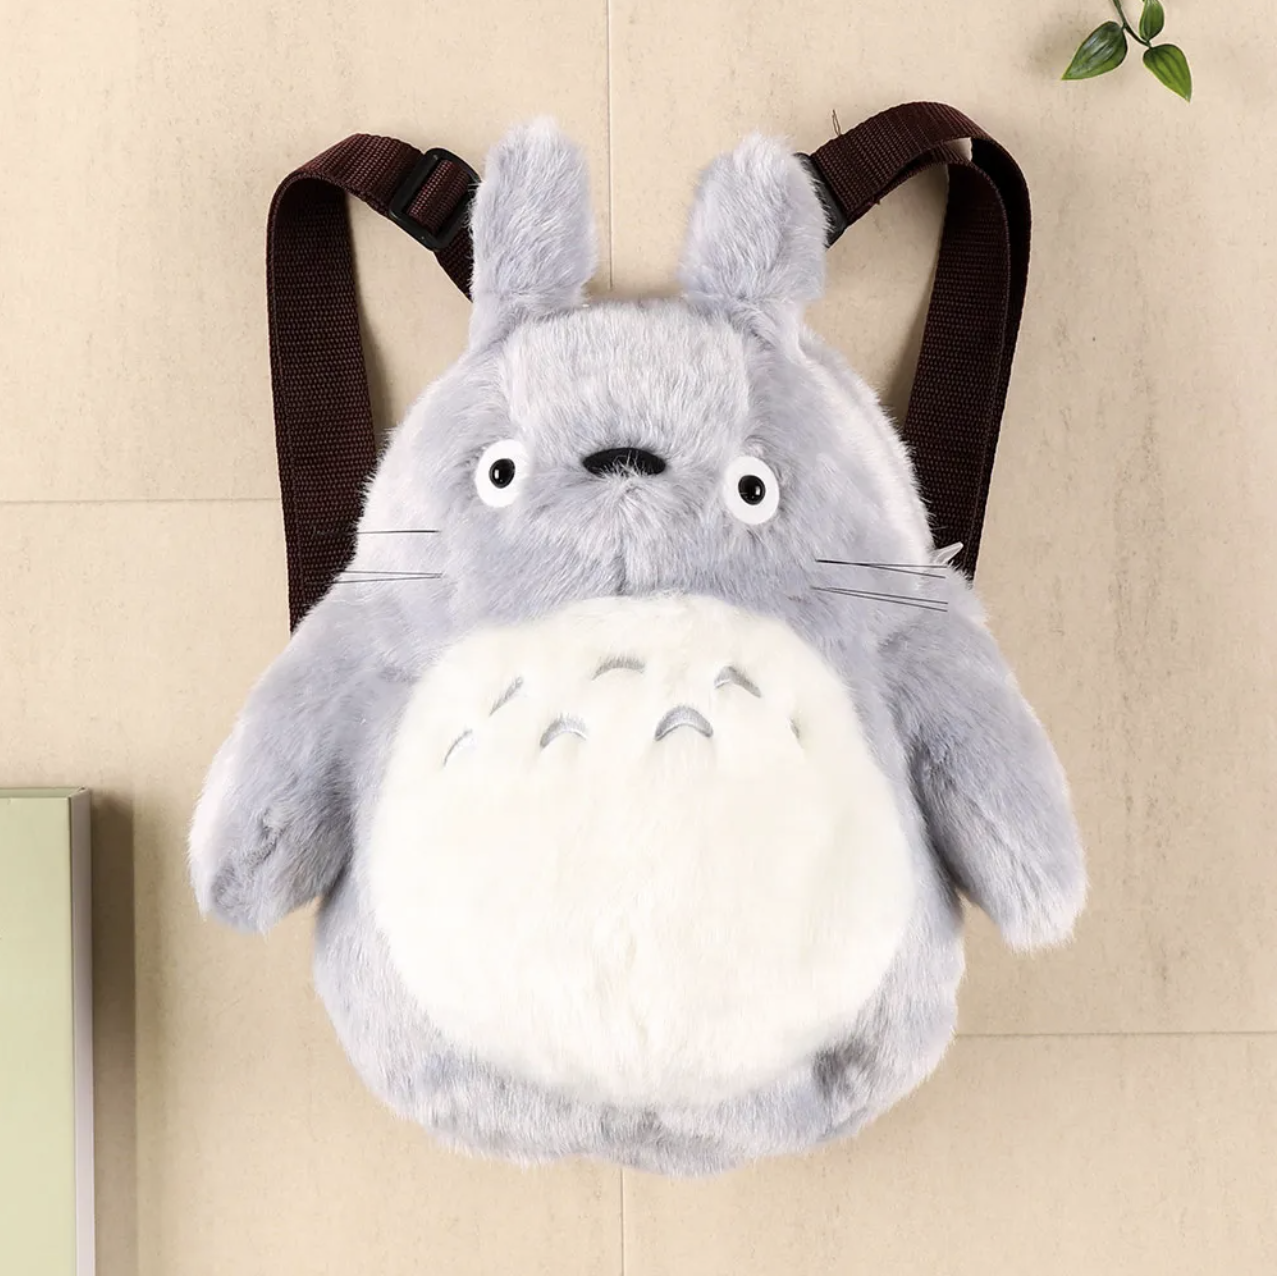 Studio Ghibli releases new plush toy backpacks for adults and